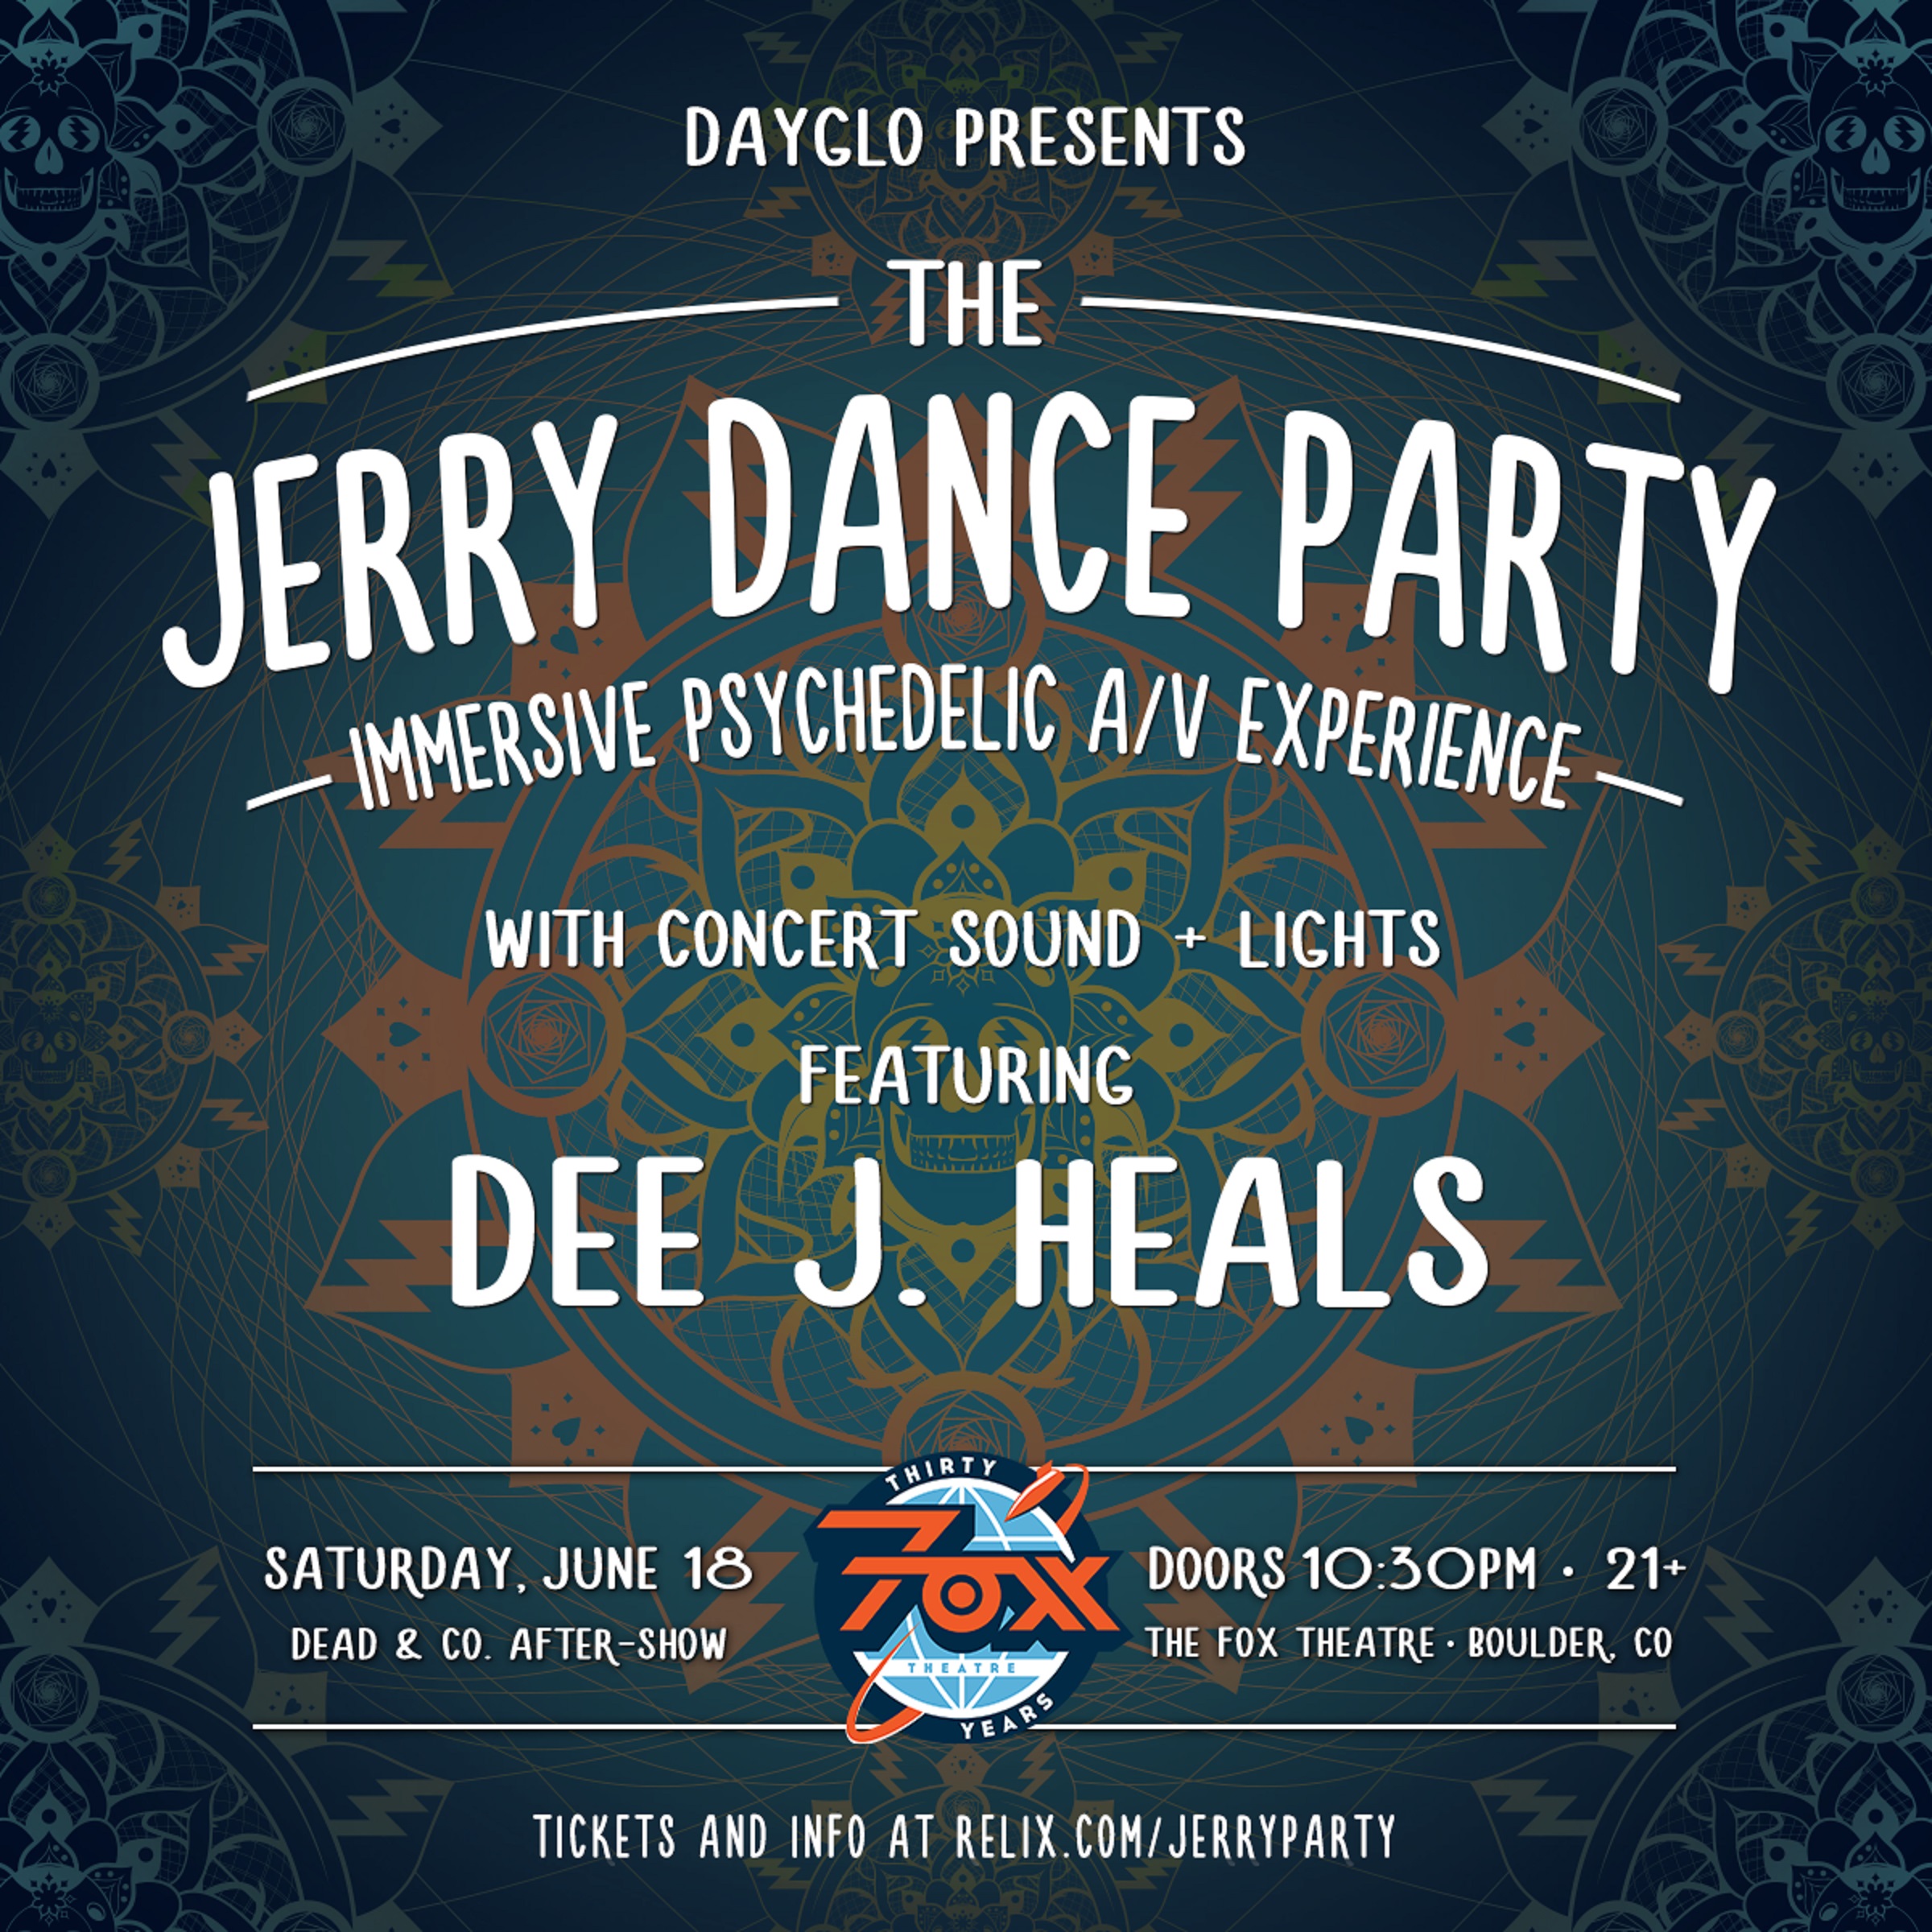 Dead & Company After Party - Jerry Dance Party at Fox Theatre